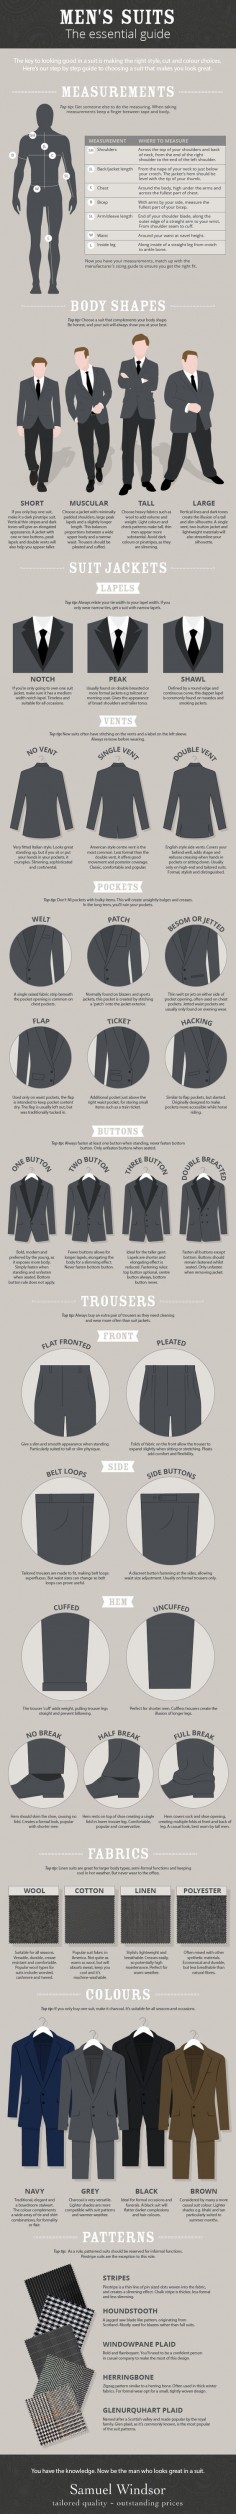 Buying a new suit? Confused by all the different choices? Read out the essential infographic guide from Samuel Windsor to ensure you make the right decisions. If you're not sure whether you want a full break or half break, or whether you should choose a flaps or welts for your pockets, this guide will help.